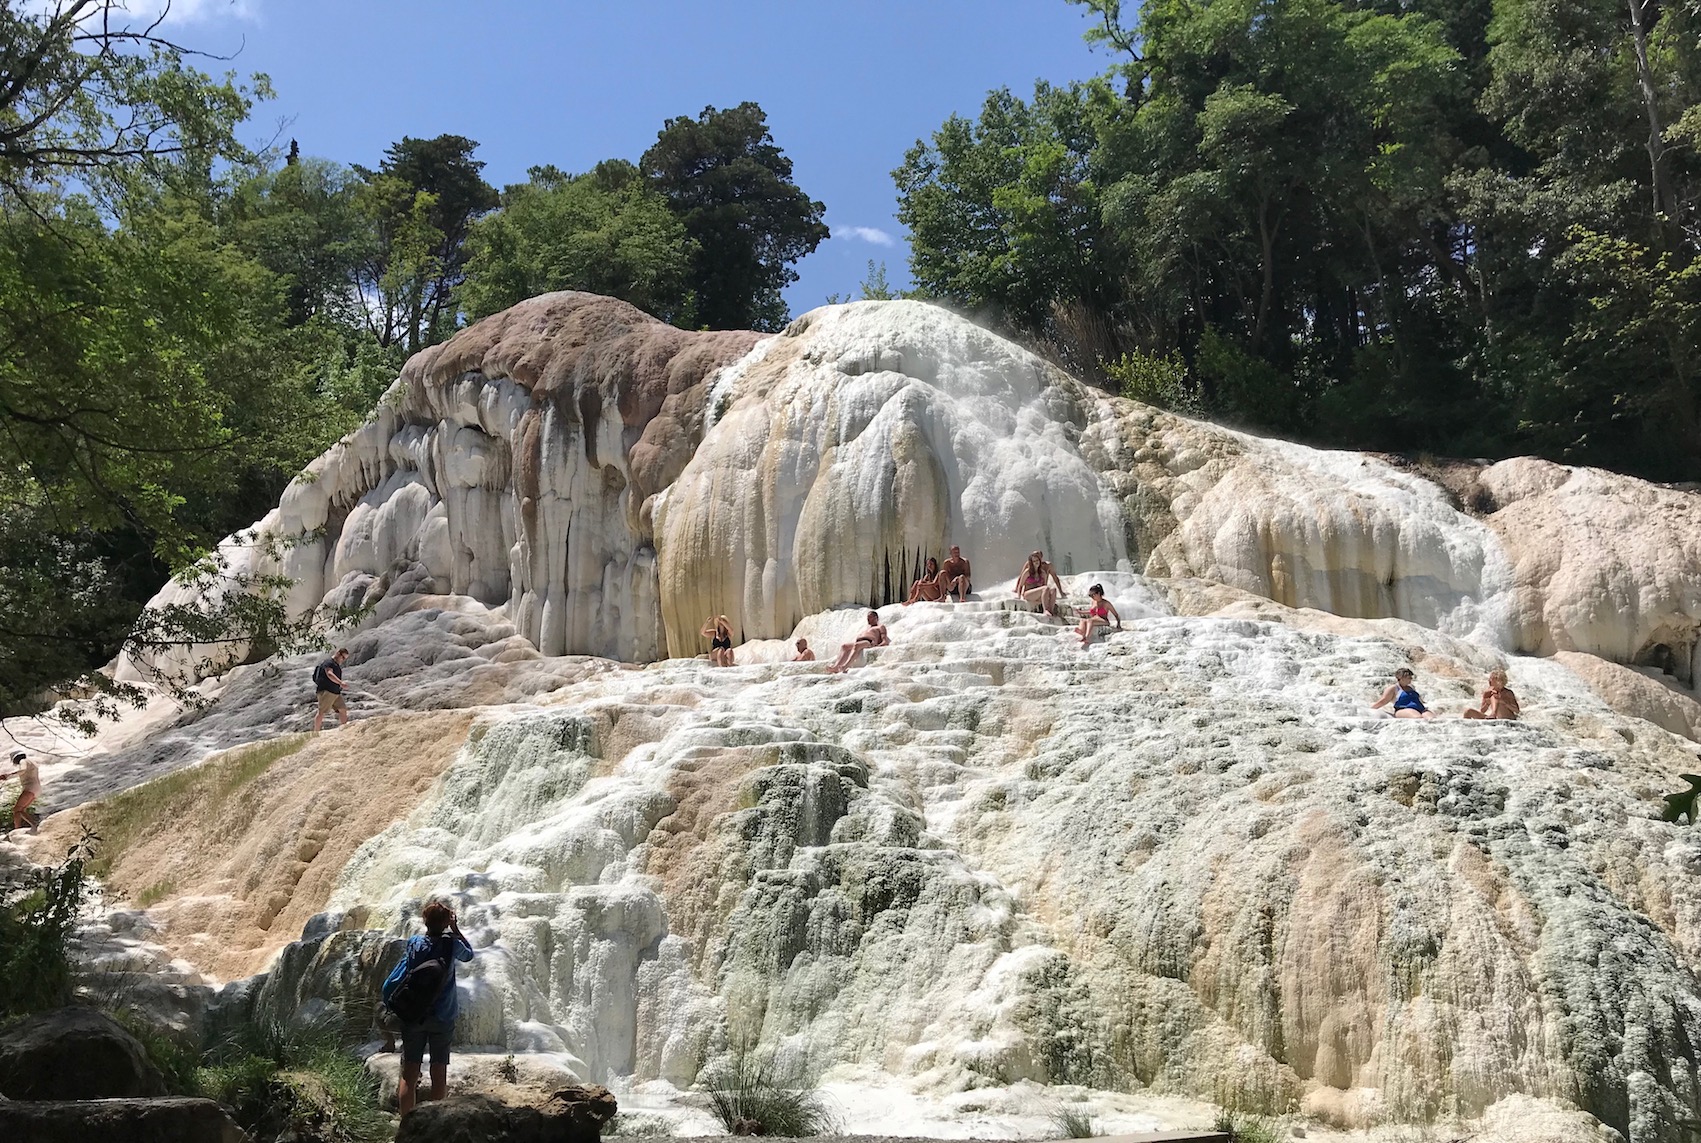 Locals enjoy the warming waters of Bagni San Filippo